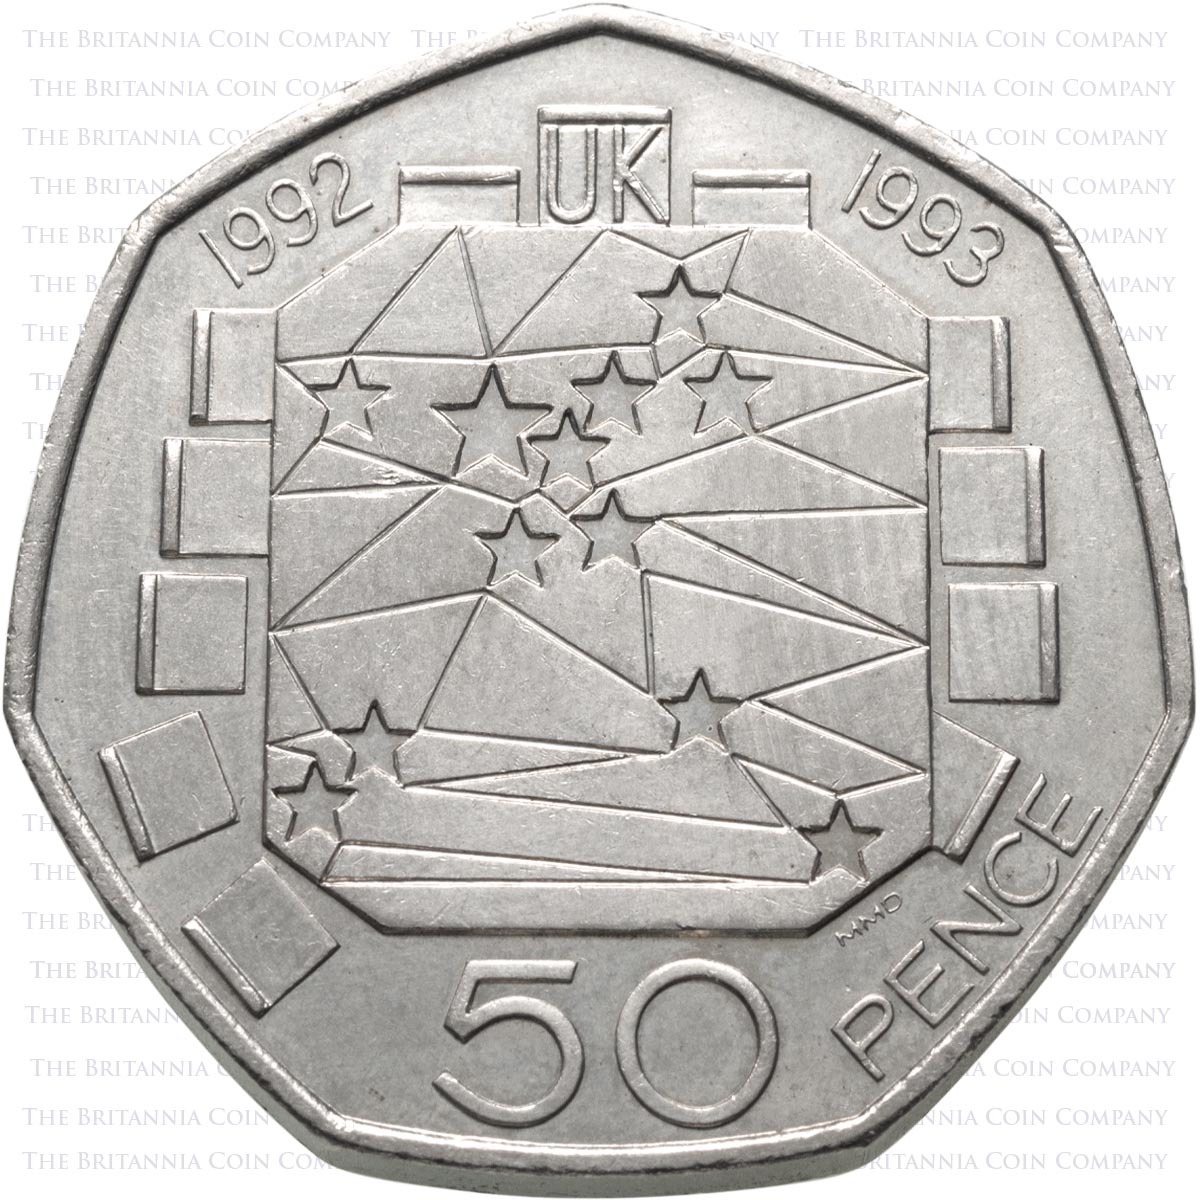 Silver proof 50p coin celebrating the completion of the European single market